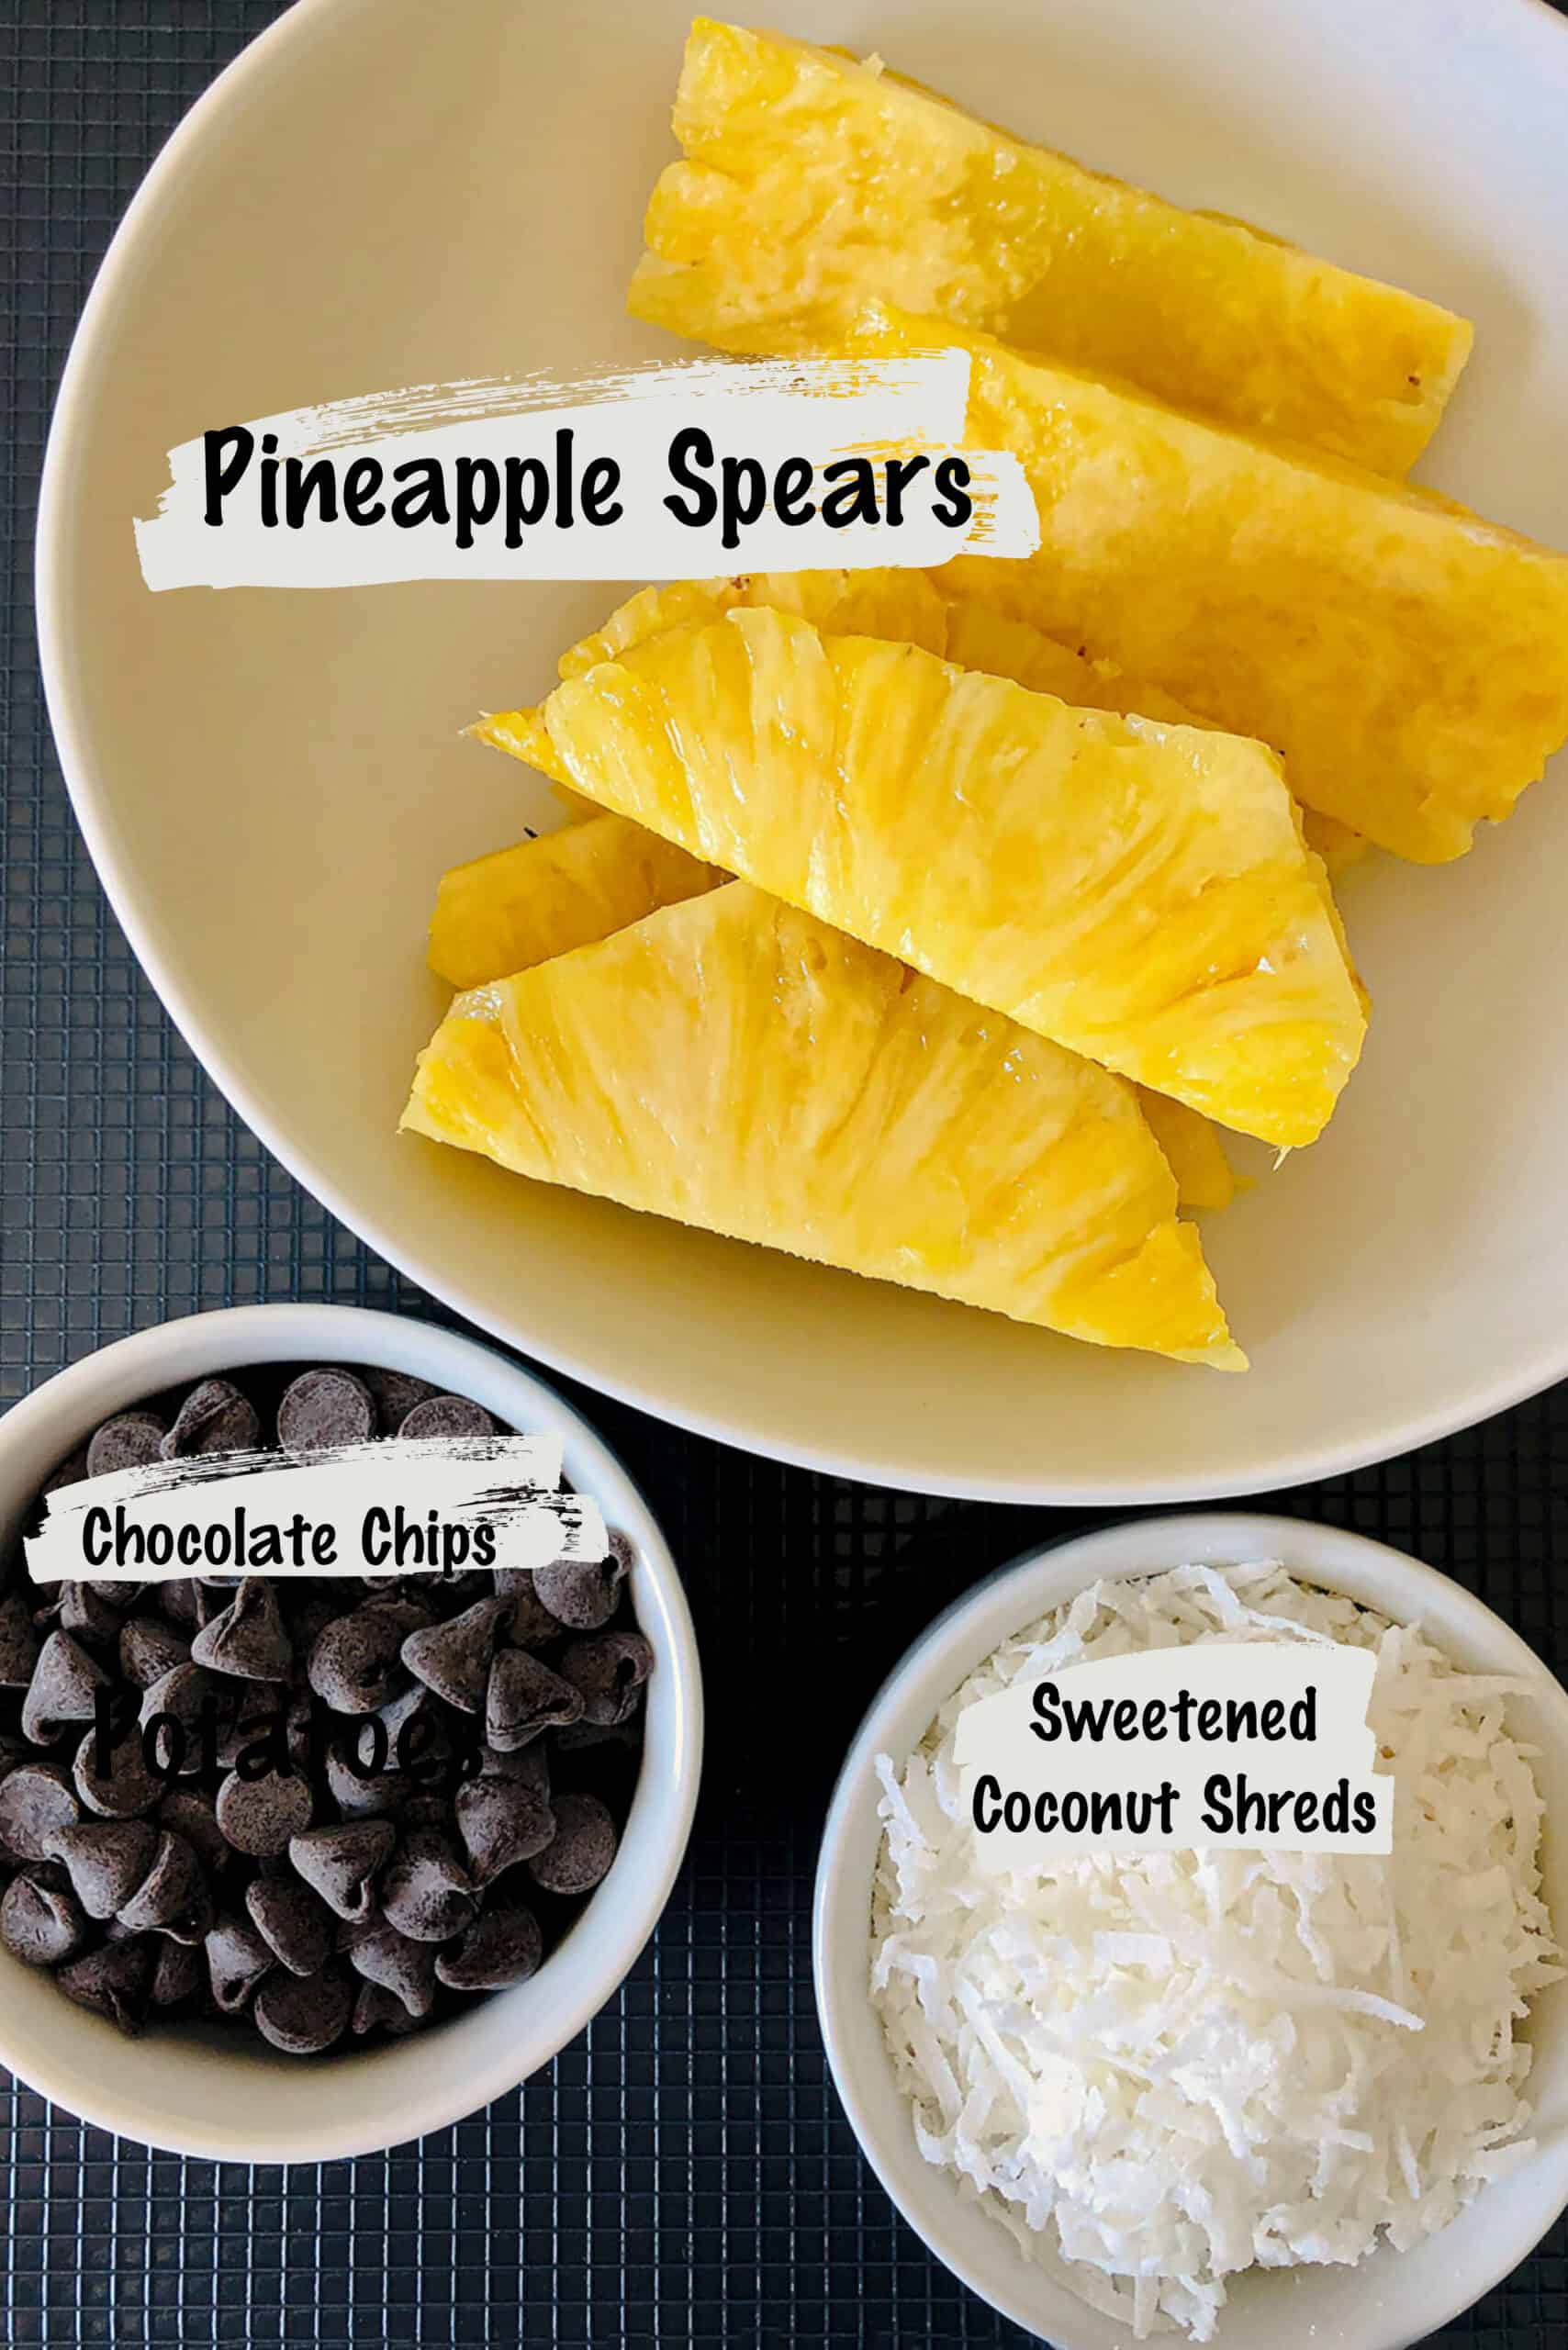 Labelled ingredients in bowls to make chocolate dipped pineapple spears.